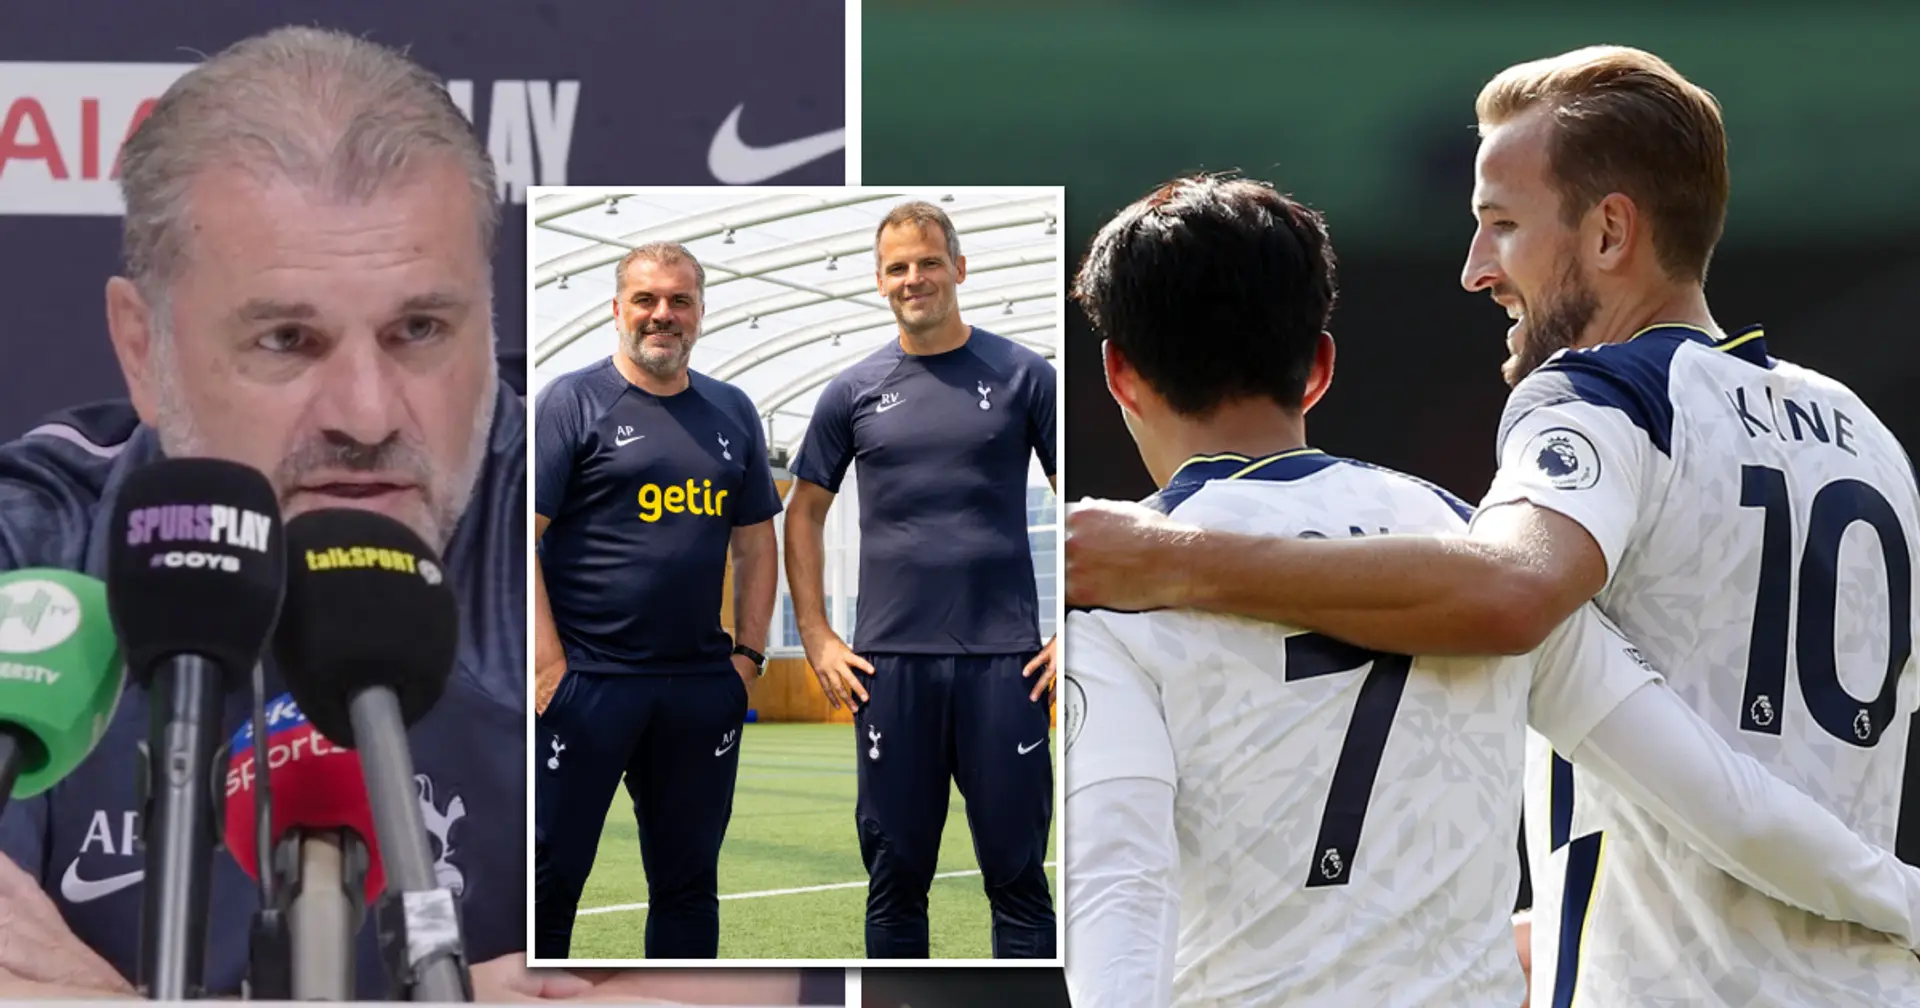 'That's why I'm here': Postecoglou delivered an uplifting message to Spurs fans